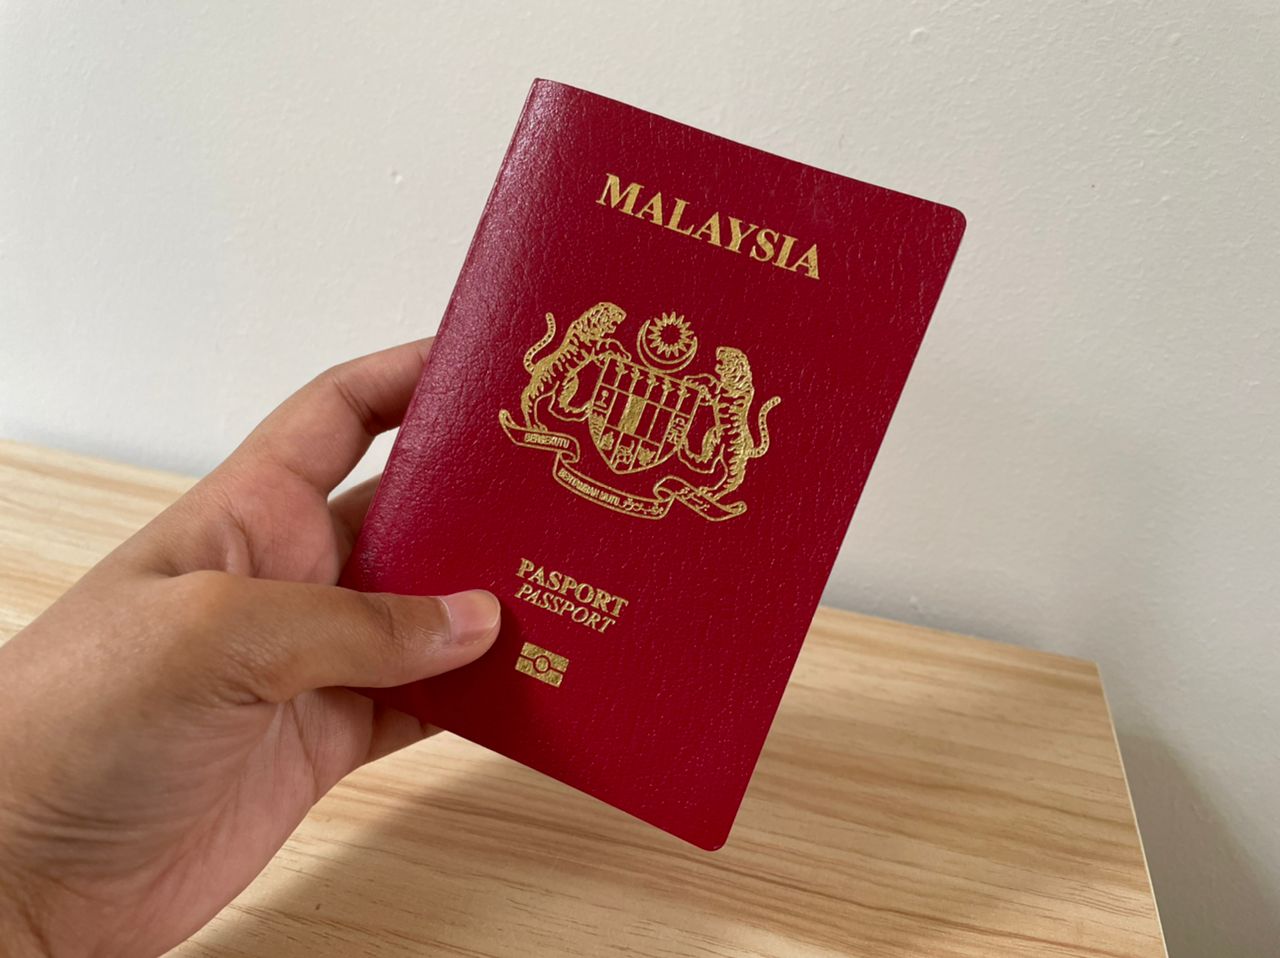 Did you know it's possible to renew your Malaysian passport online? Image credit: Wau Post